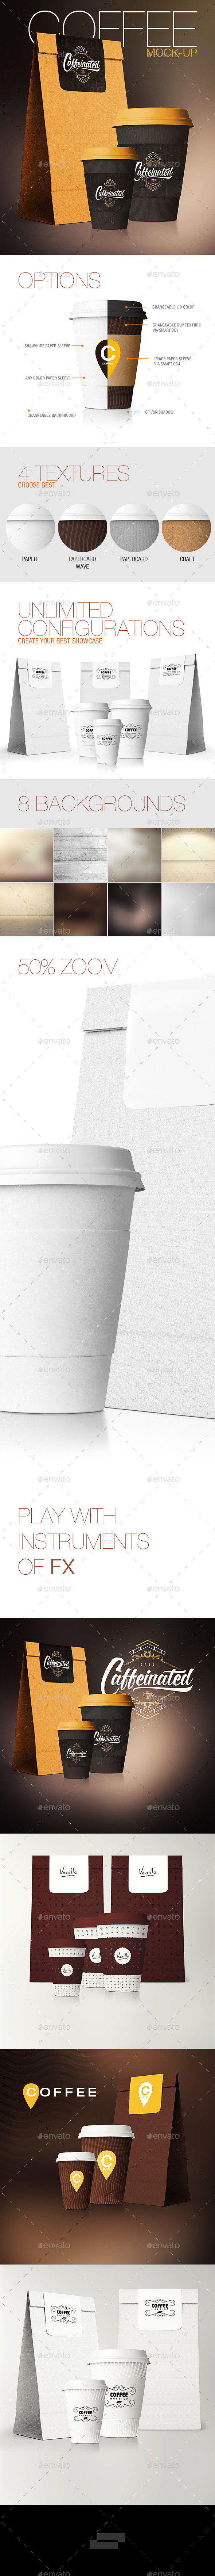 Coffee Cup / Coffee Package Mock-Up